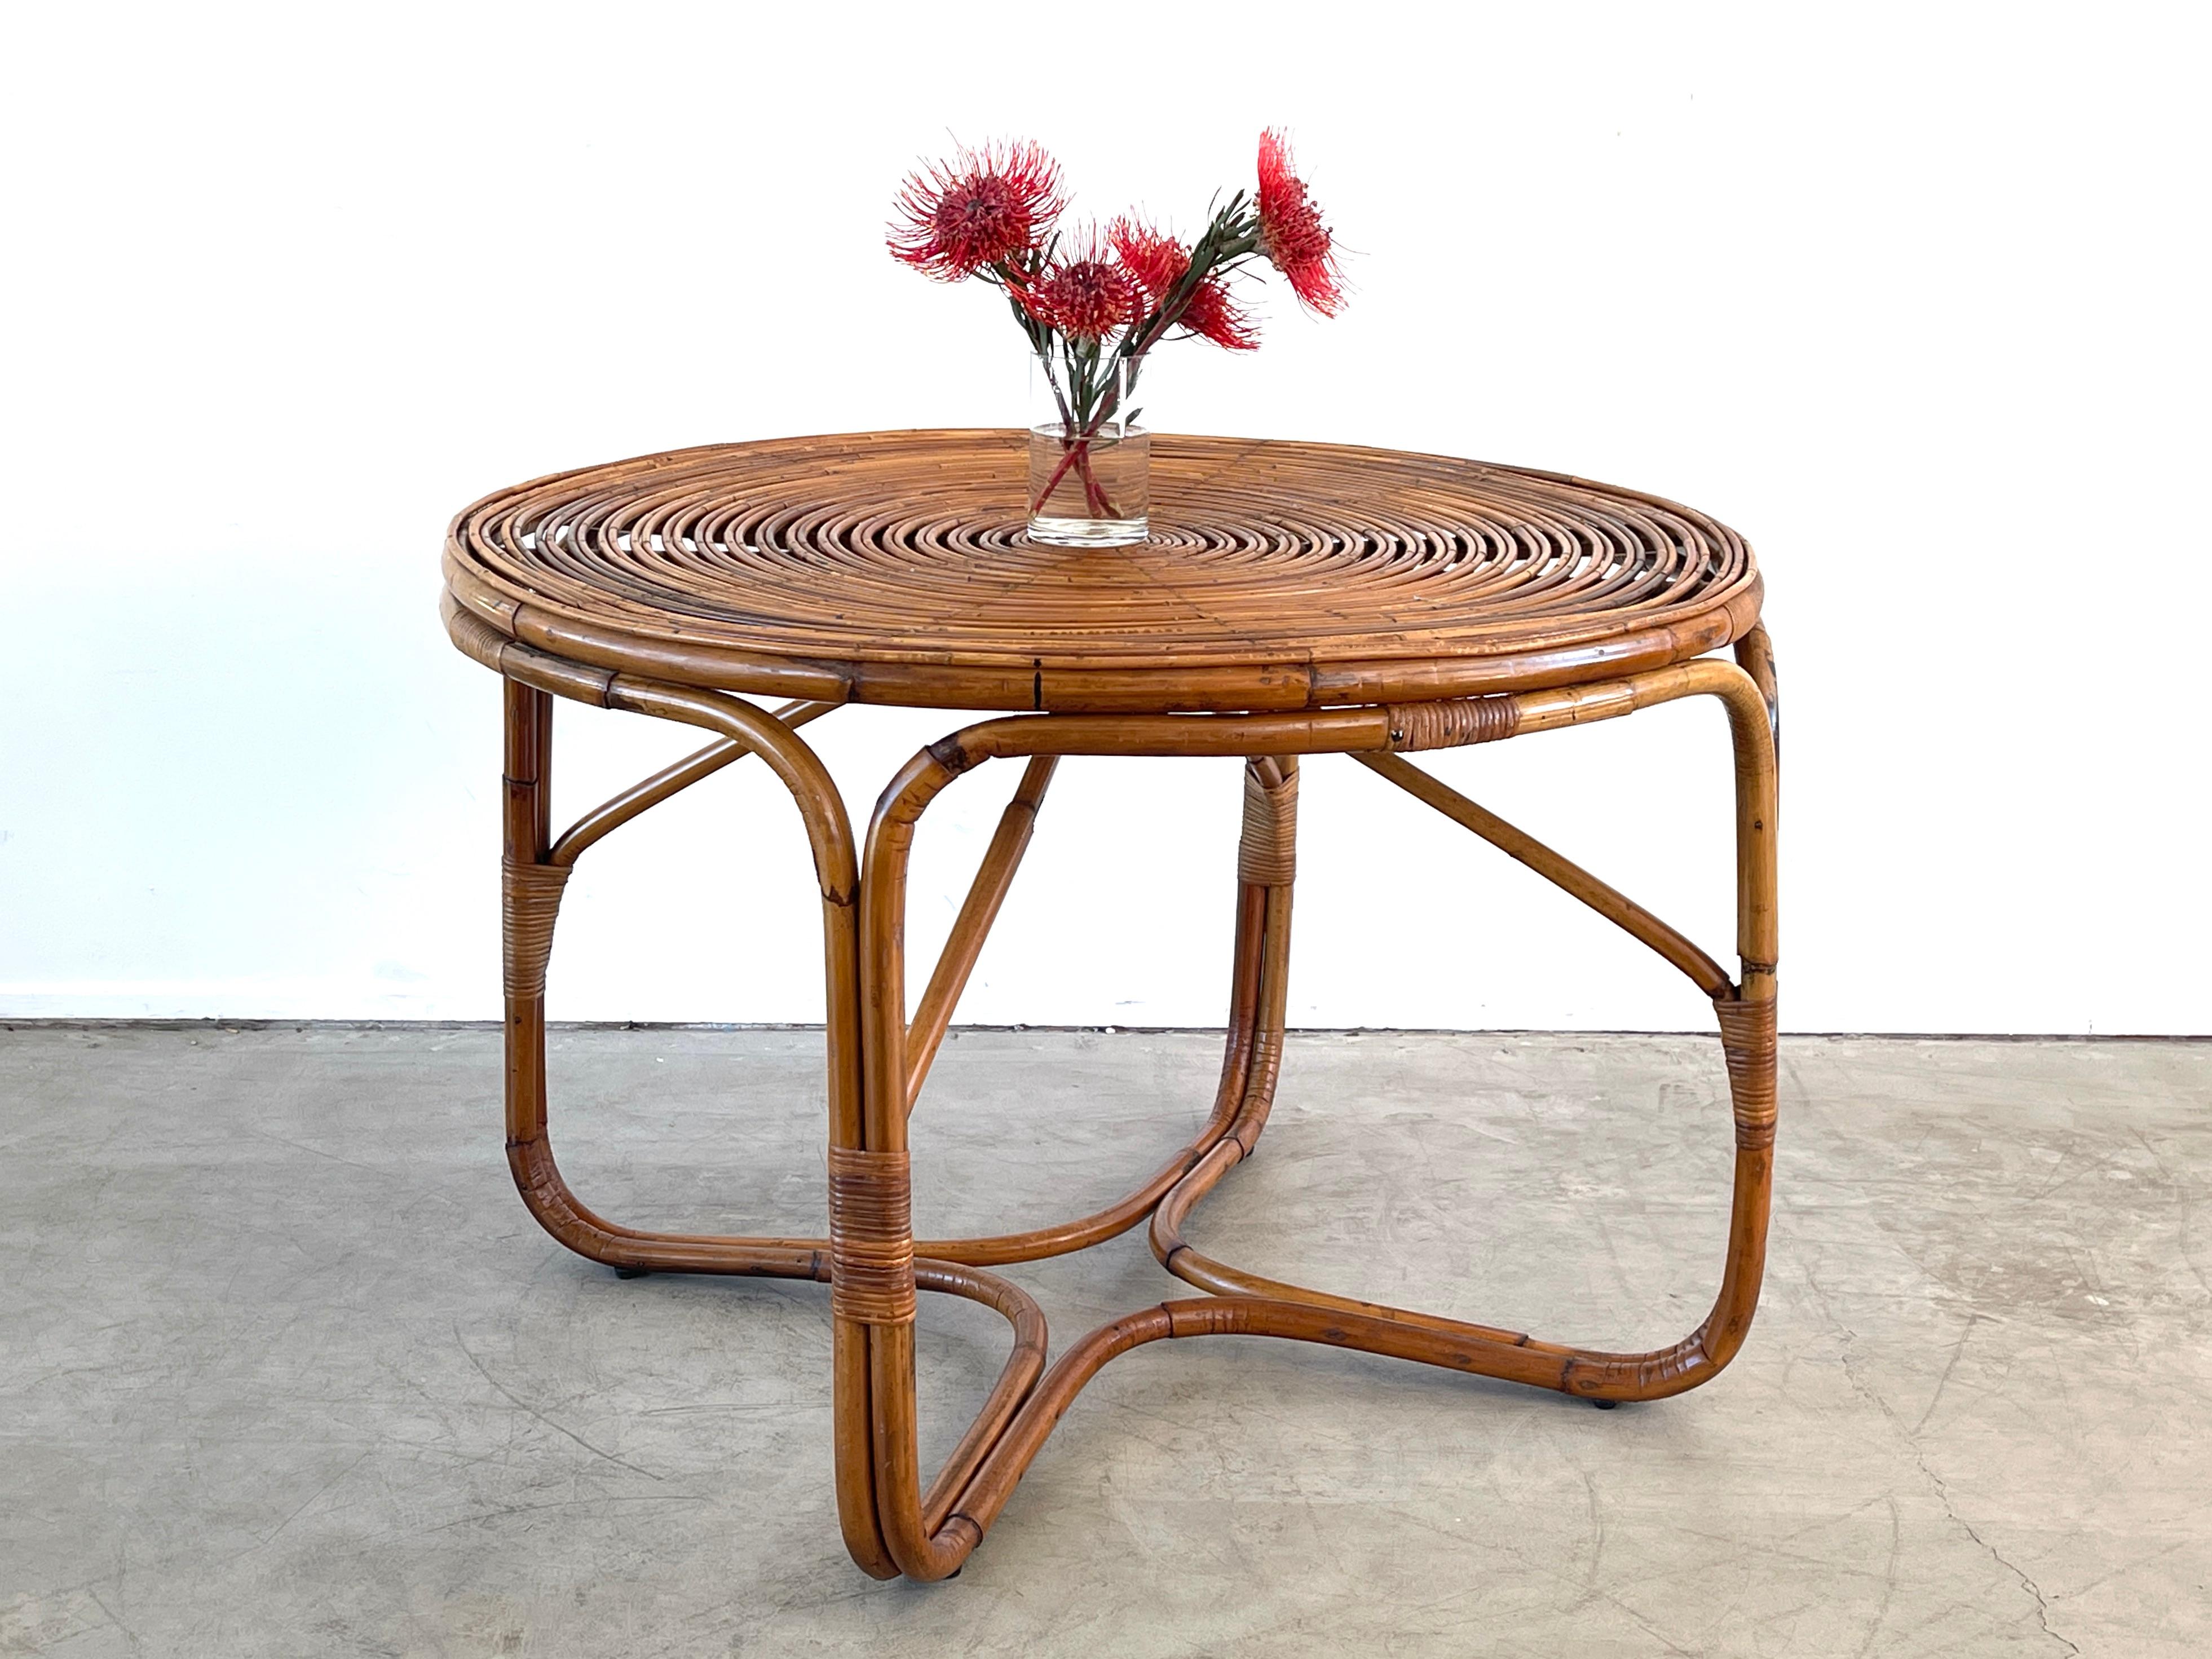 1950's Bamboo dining table 
Great circular shape and rare in a dining table height.